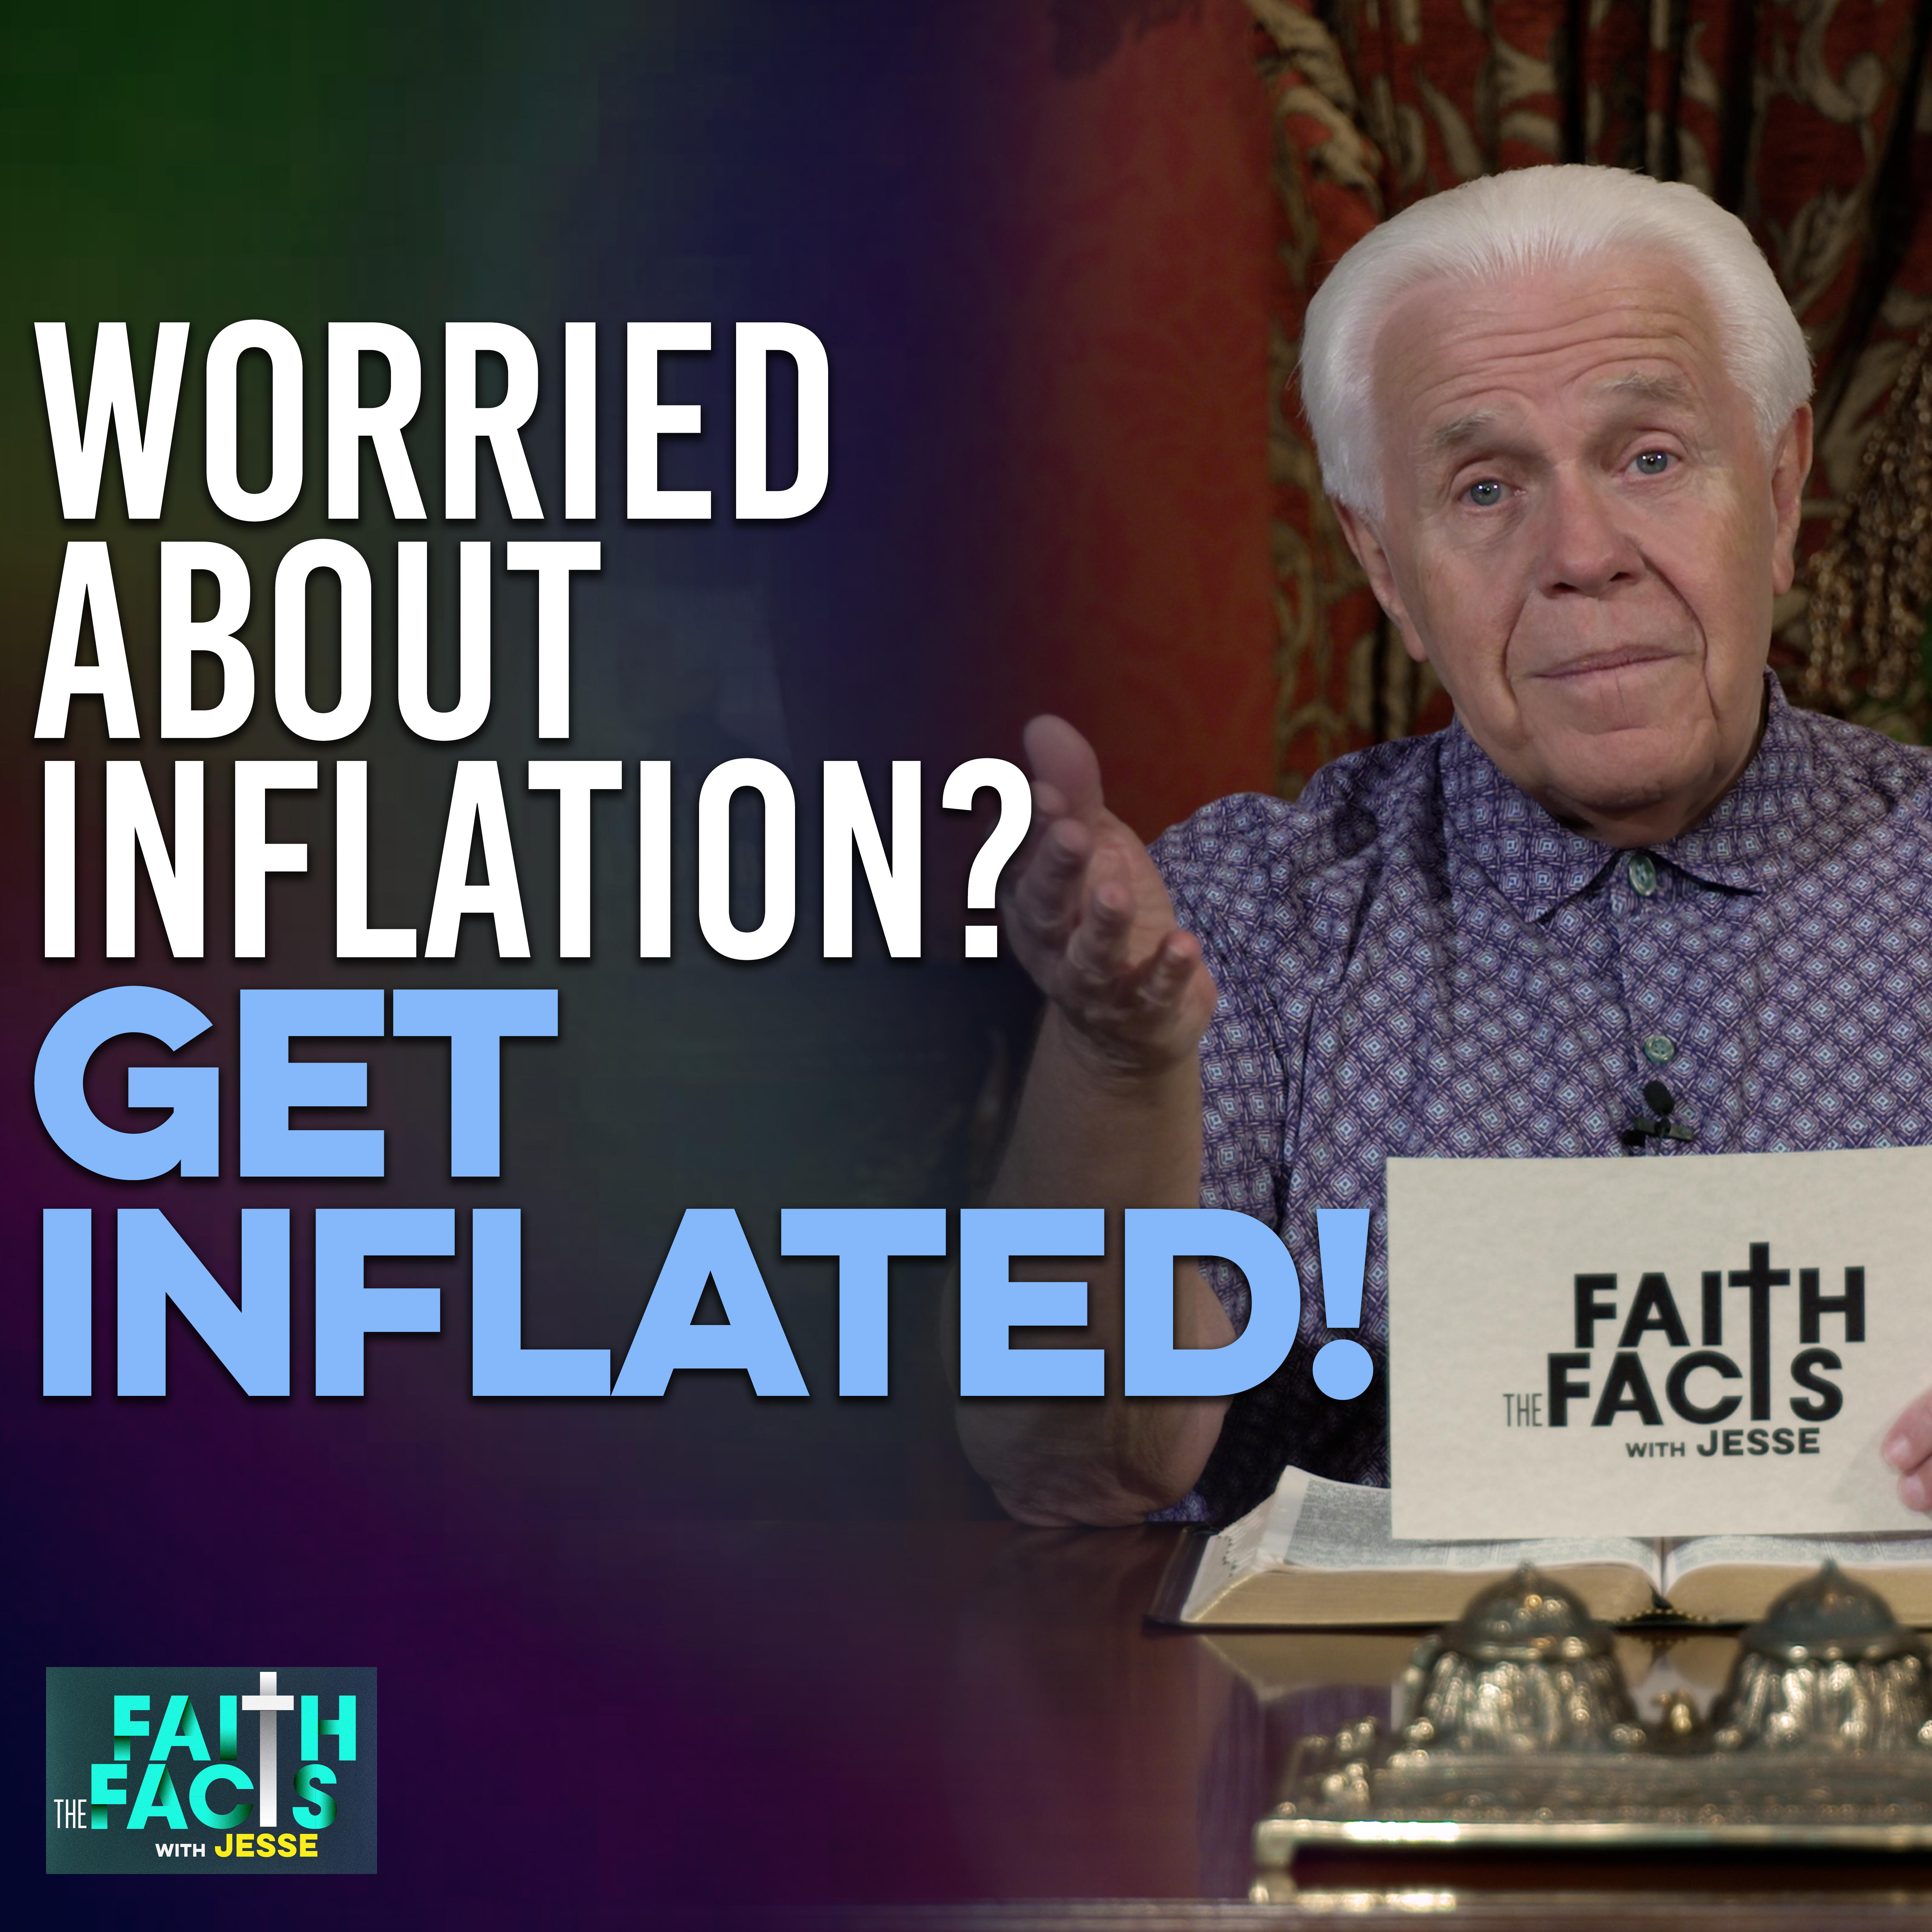 Worried About Inflation? Get Inflated!